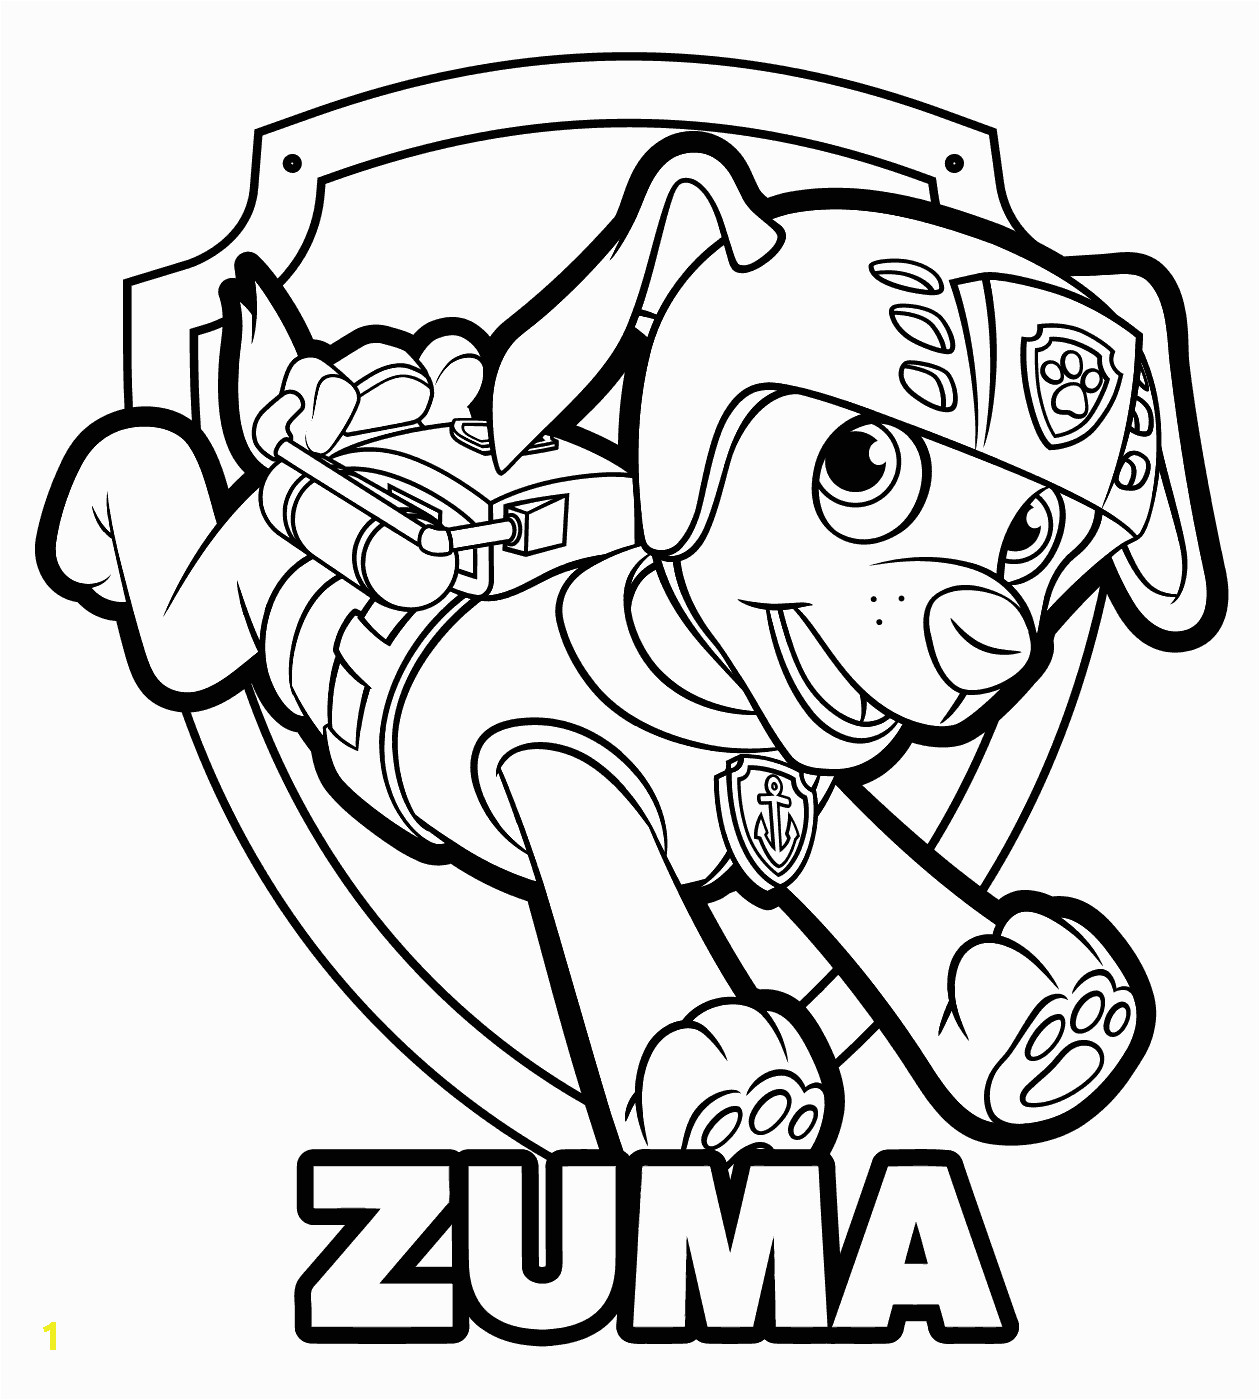 Coloring Pages for Paw Patrol Paw Patrol Coloring Pages